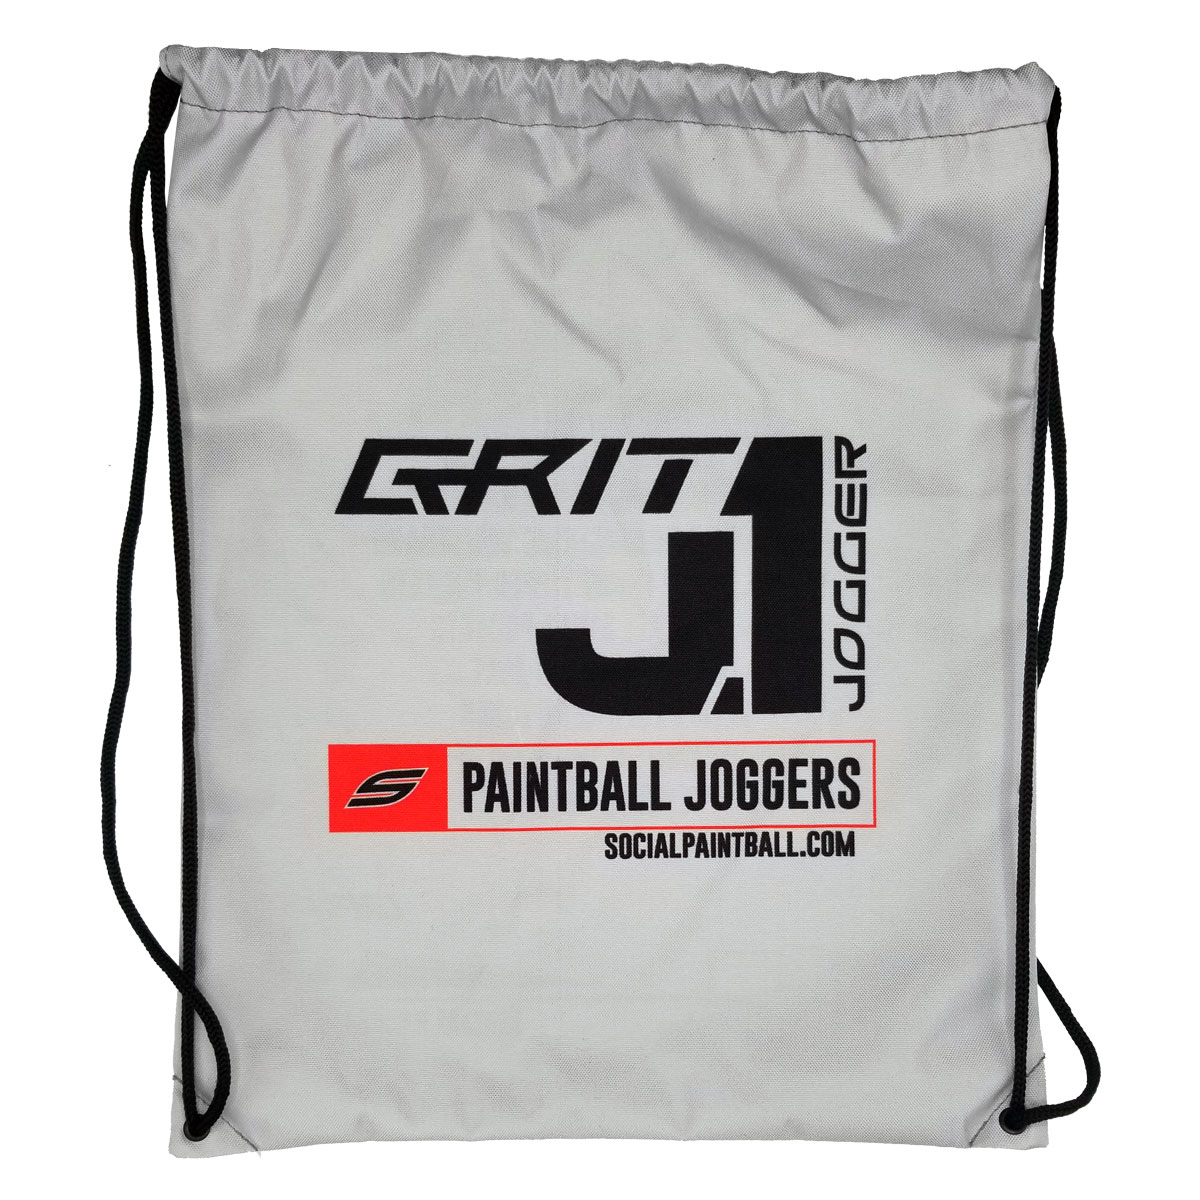 Grit J1 Jogger Pants, Black Red – Legacy Sports Paintball